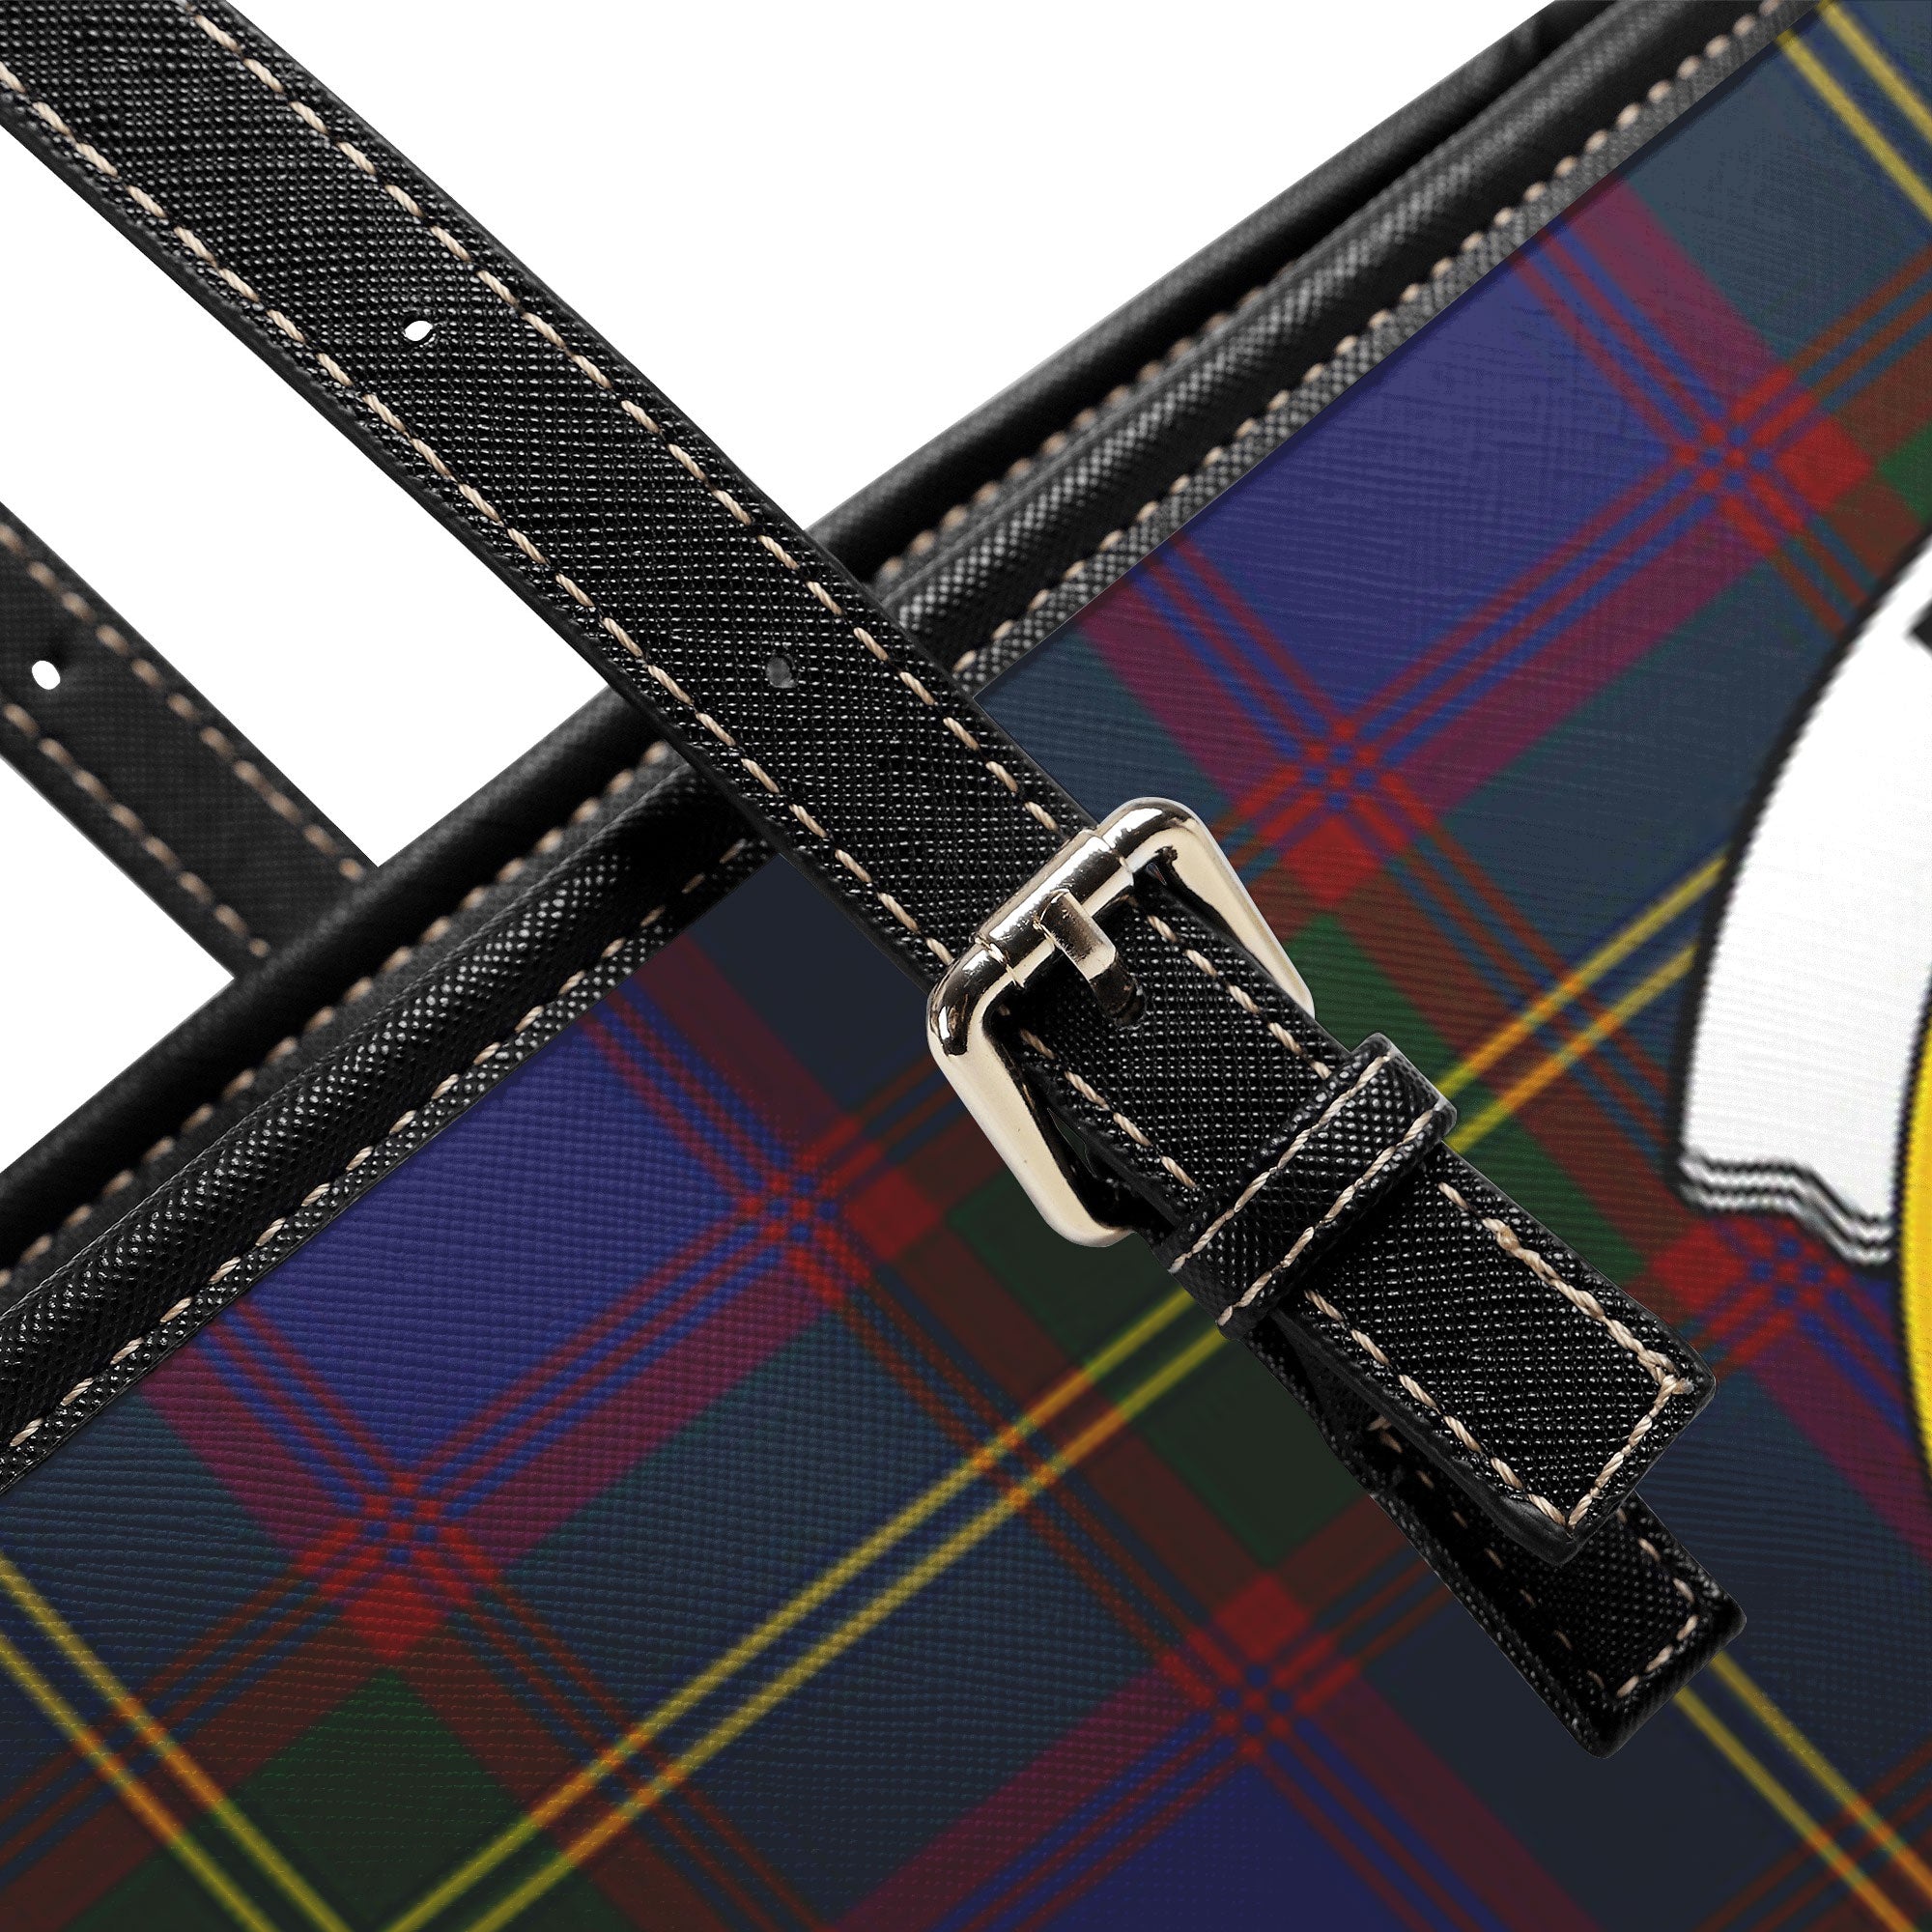 Durie Tartan Crest Leather Tote Bag